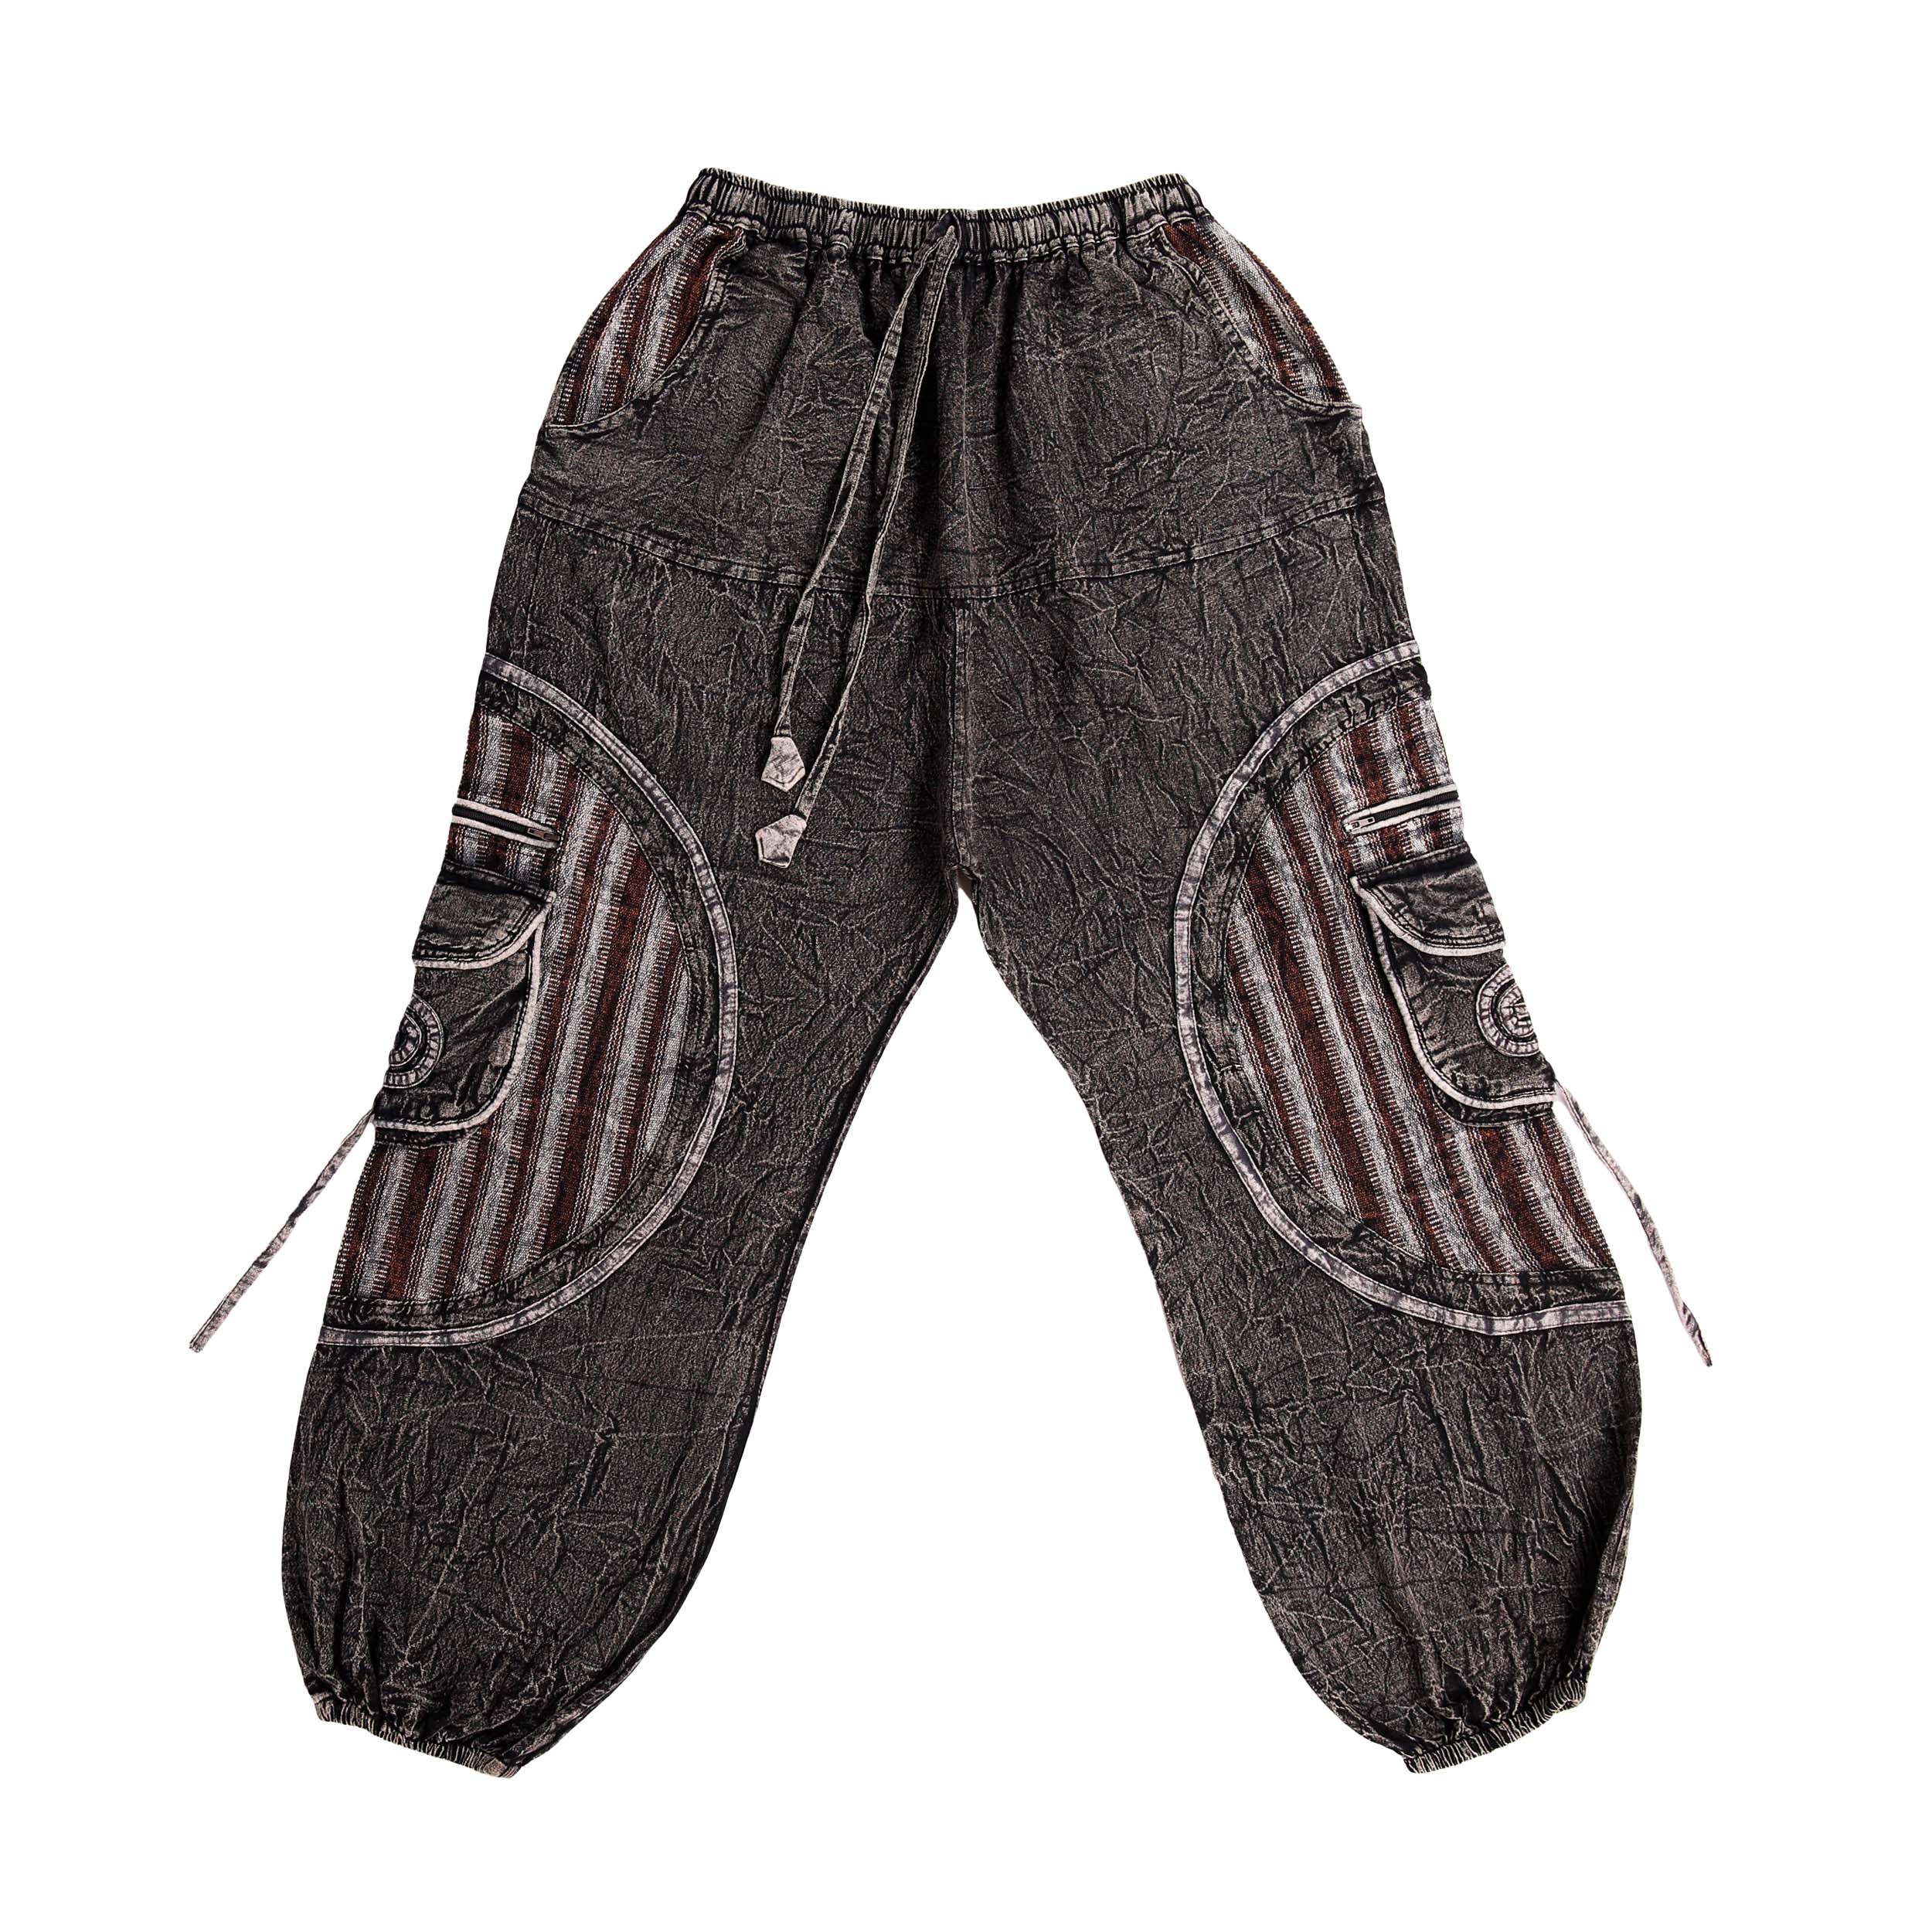 Hippie Harem Trousers - Charcoal